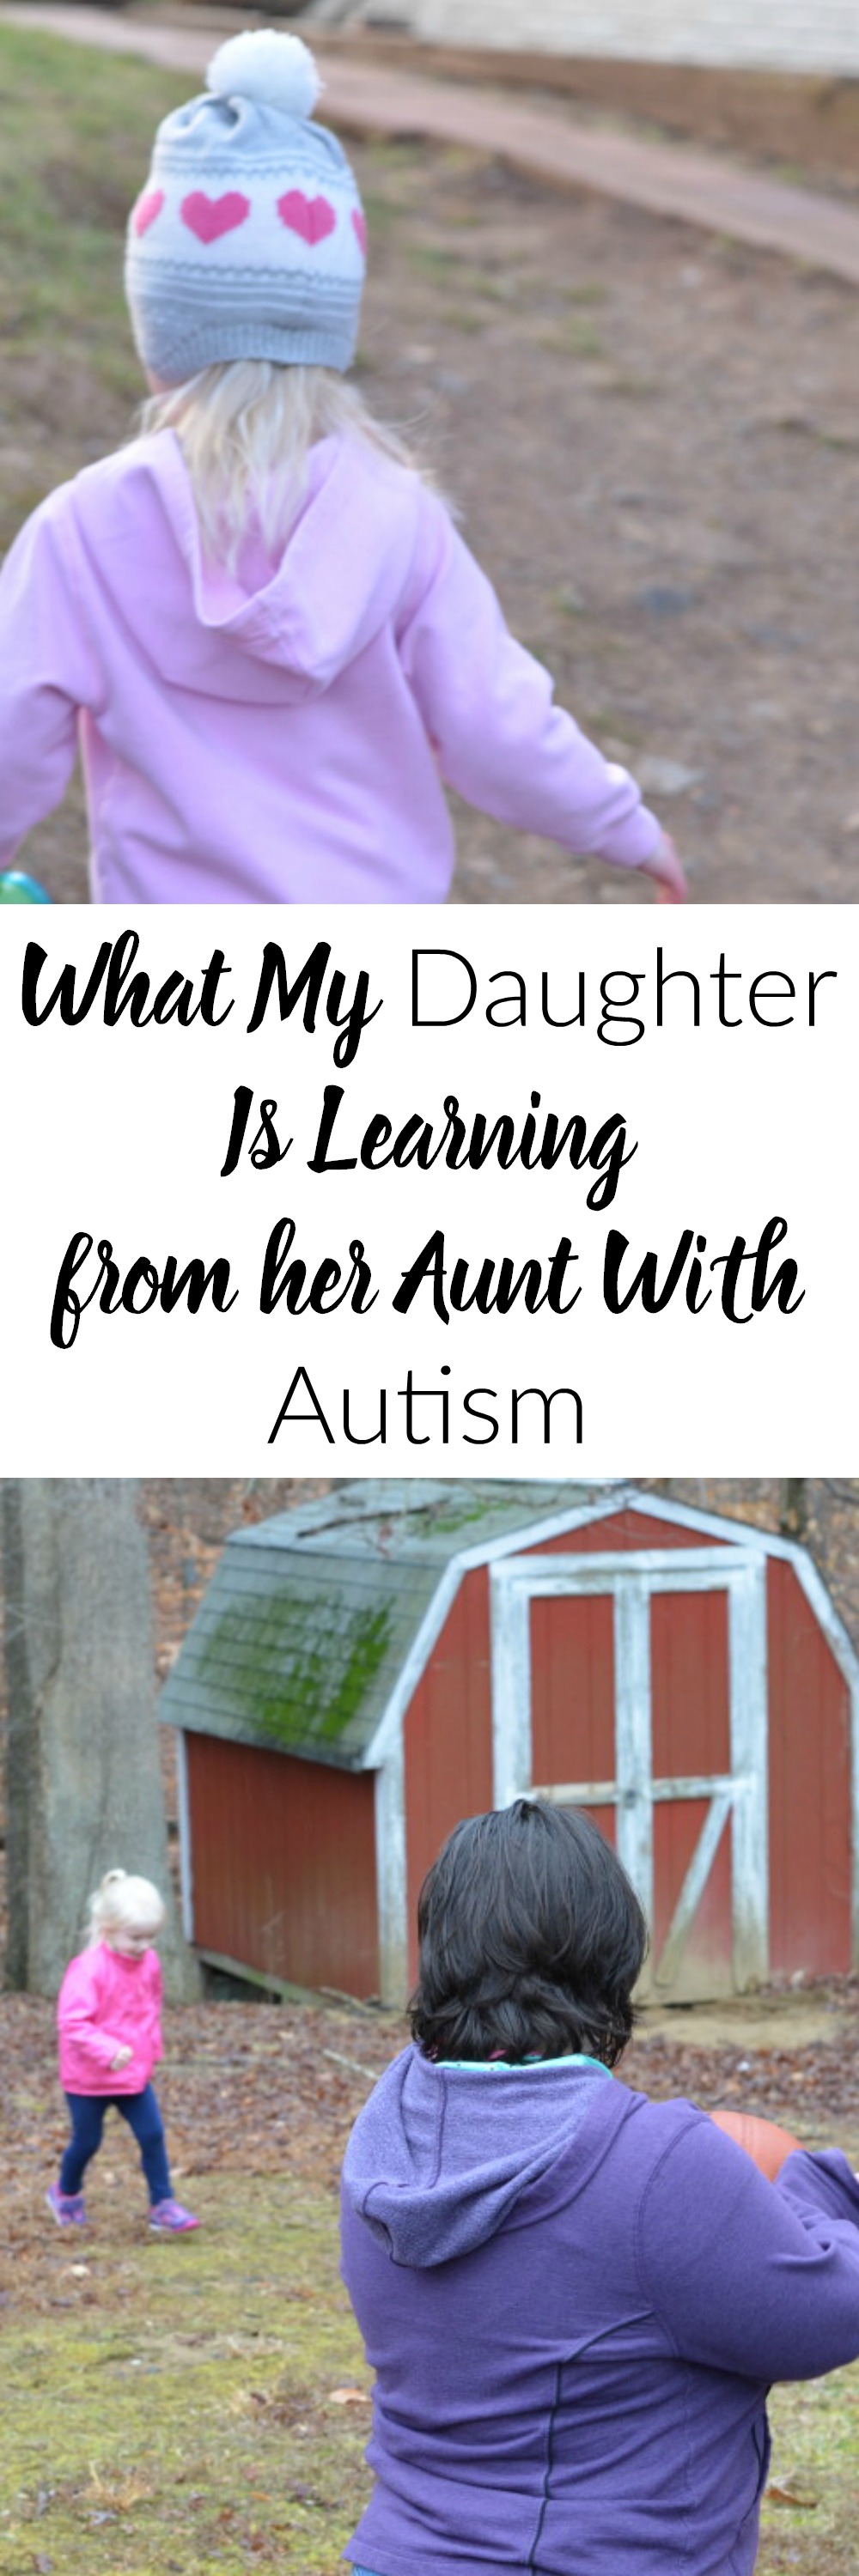 What My Daughter is Learning From Her Aunt with Autism- This post is wonderful! What a great reminder for everyon that we can learn from each other no matter our differences. What an encouraging post for families who have loved ones with Autism. 